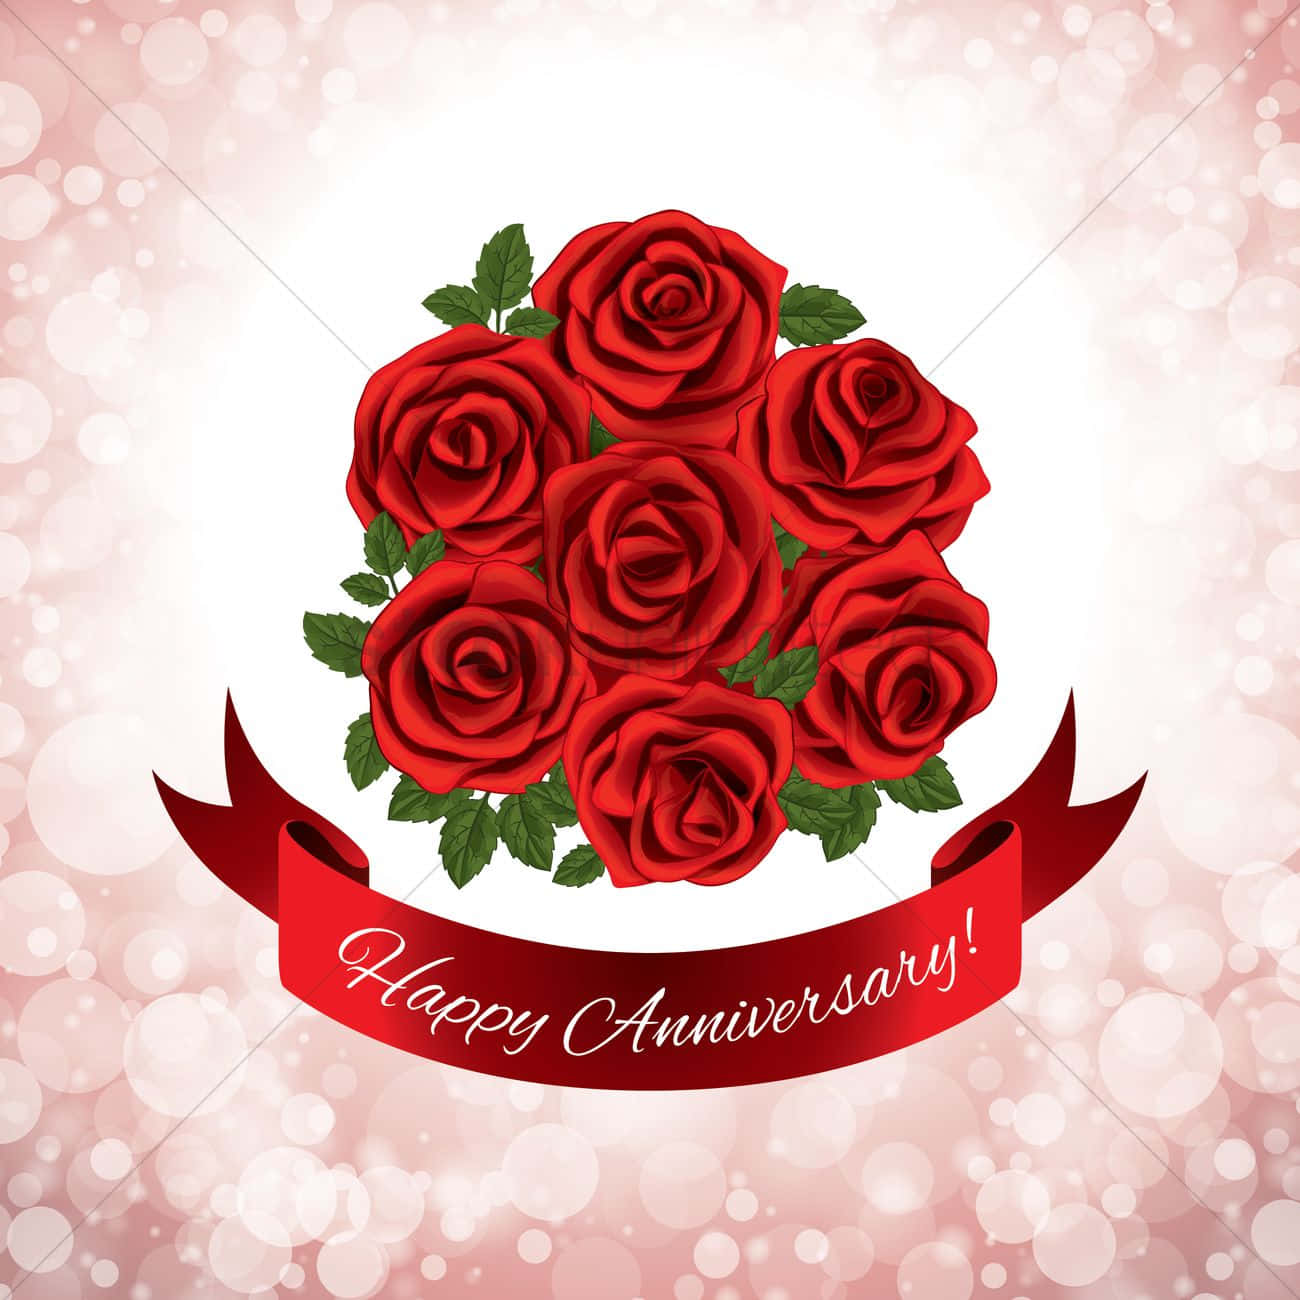 Anniversary Bouquet Of Red Roses Background